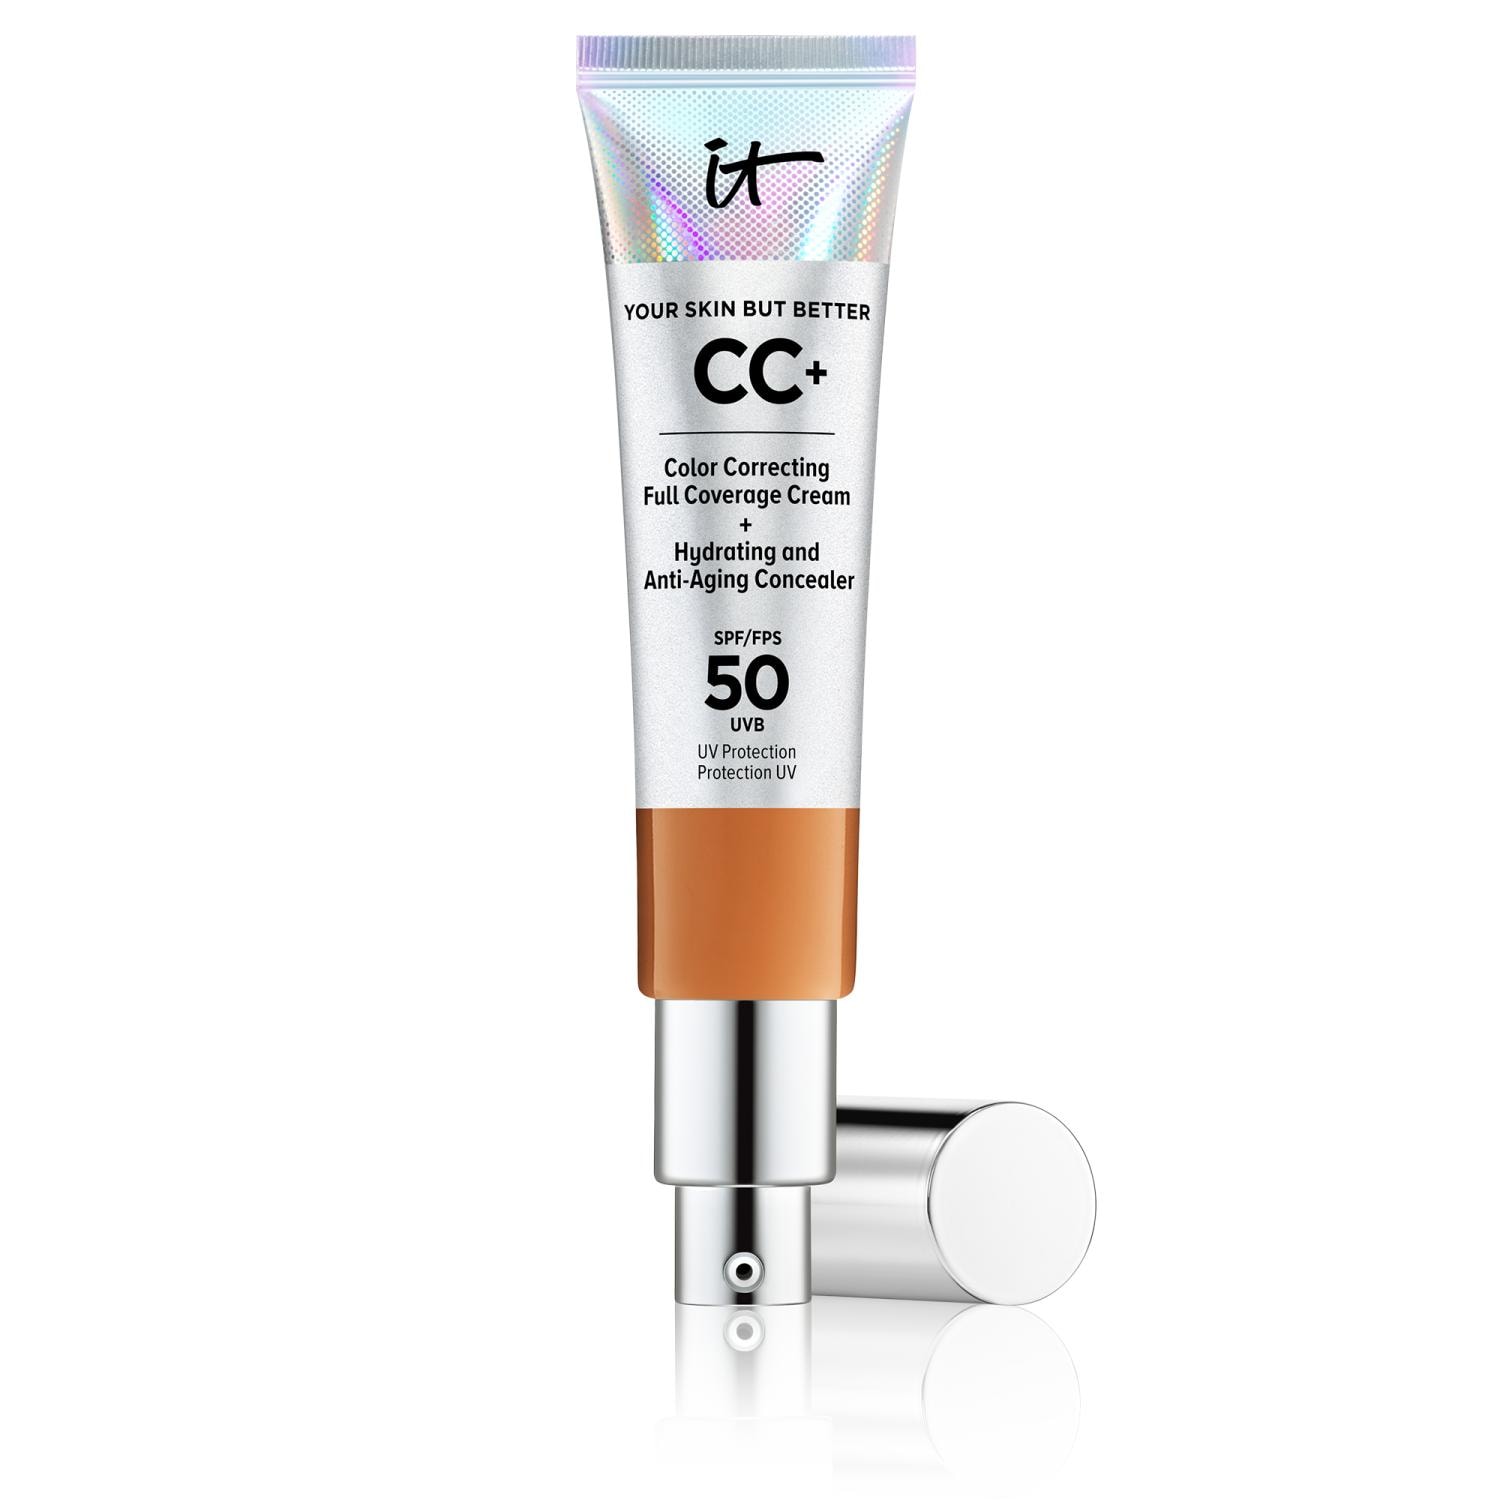 IT Cosmetics Your Skin But Better™ CC+™ Cream SPF 50,Rich, Rich